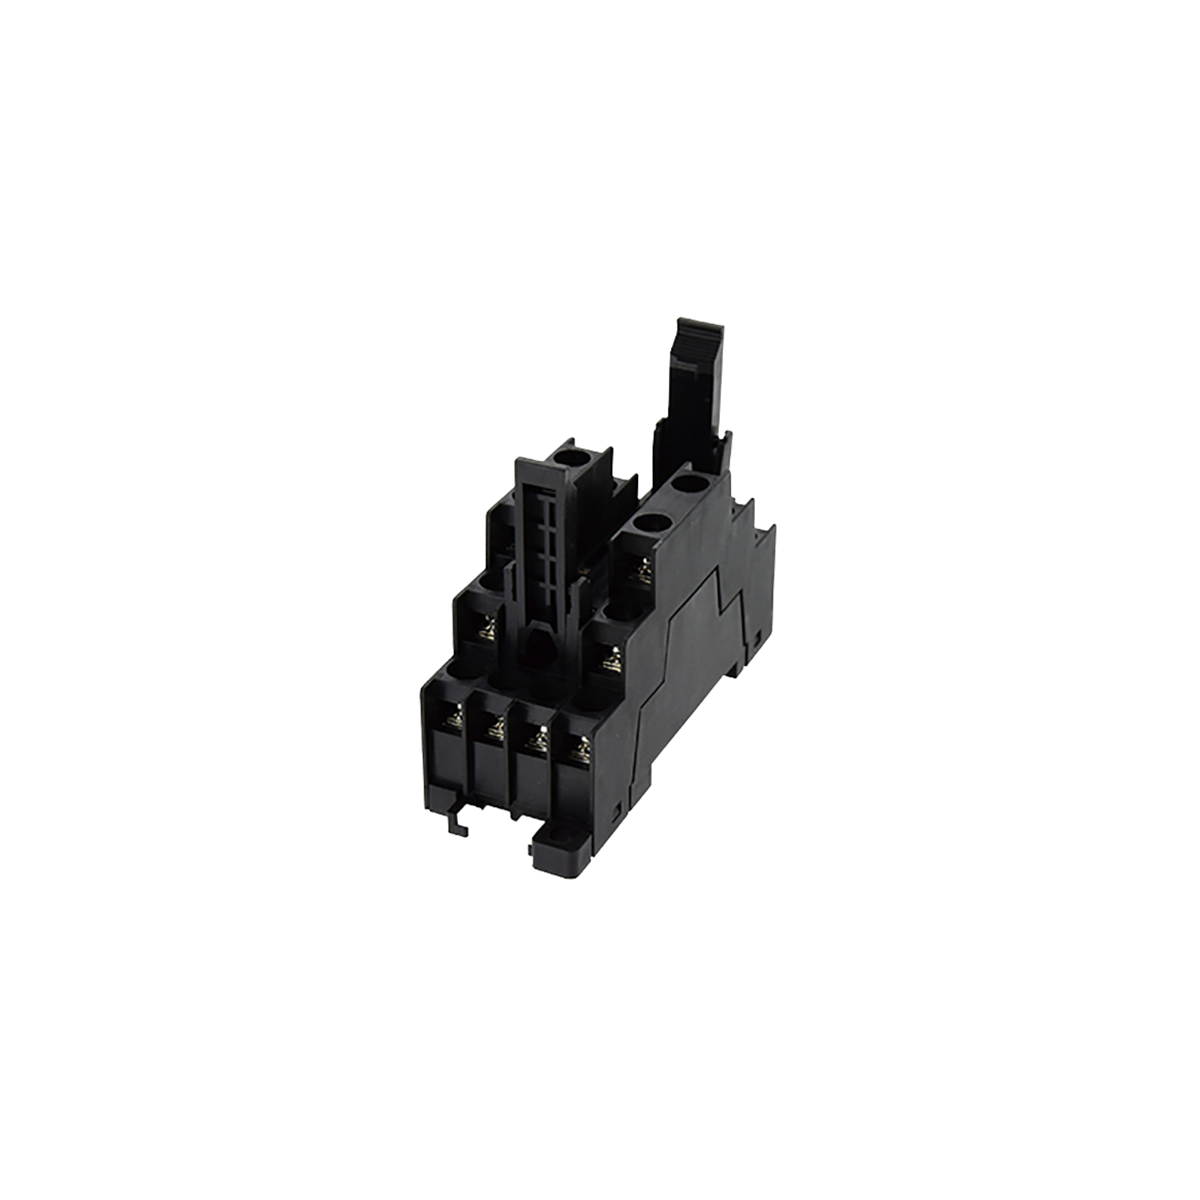 side view of a socket DIN mount with multiple terminal points